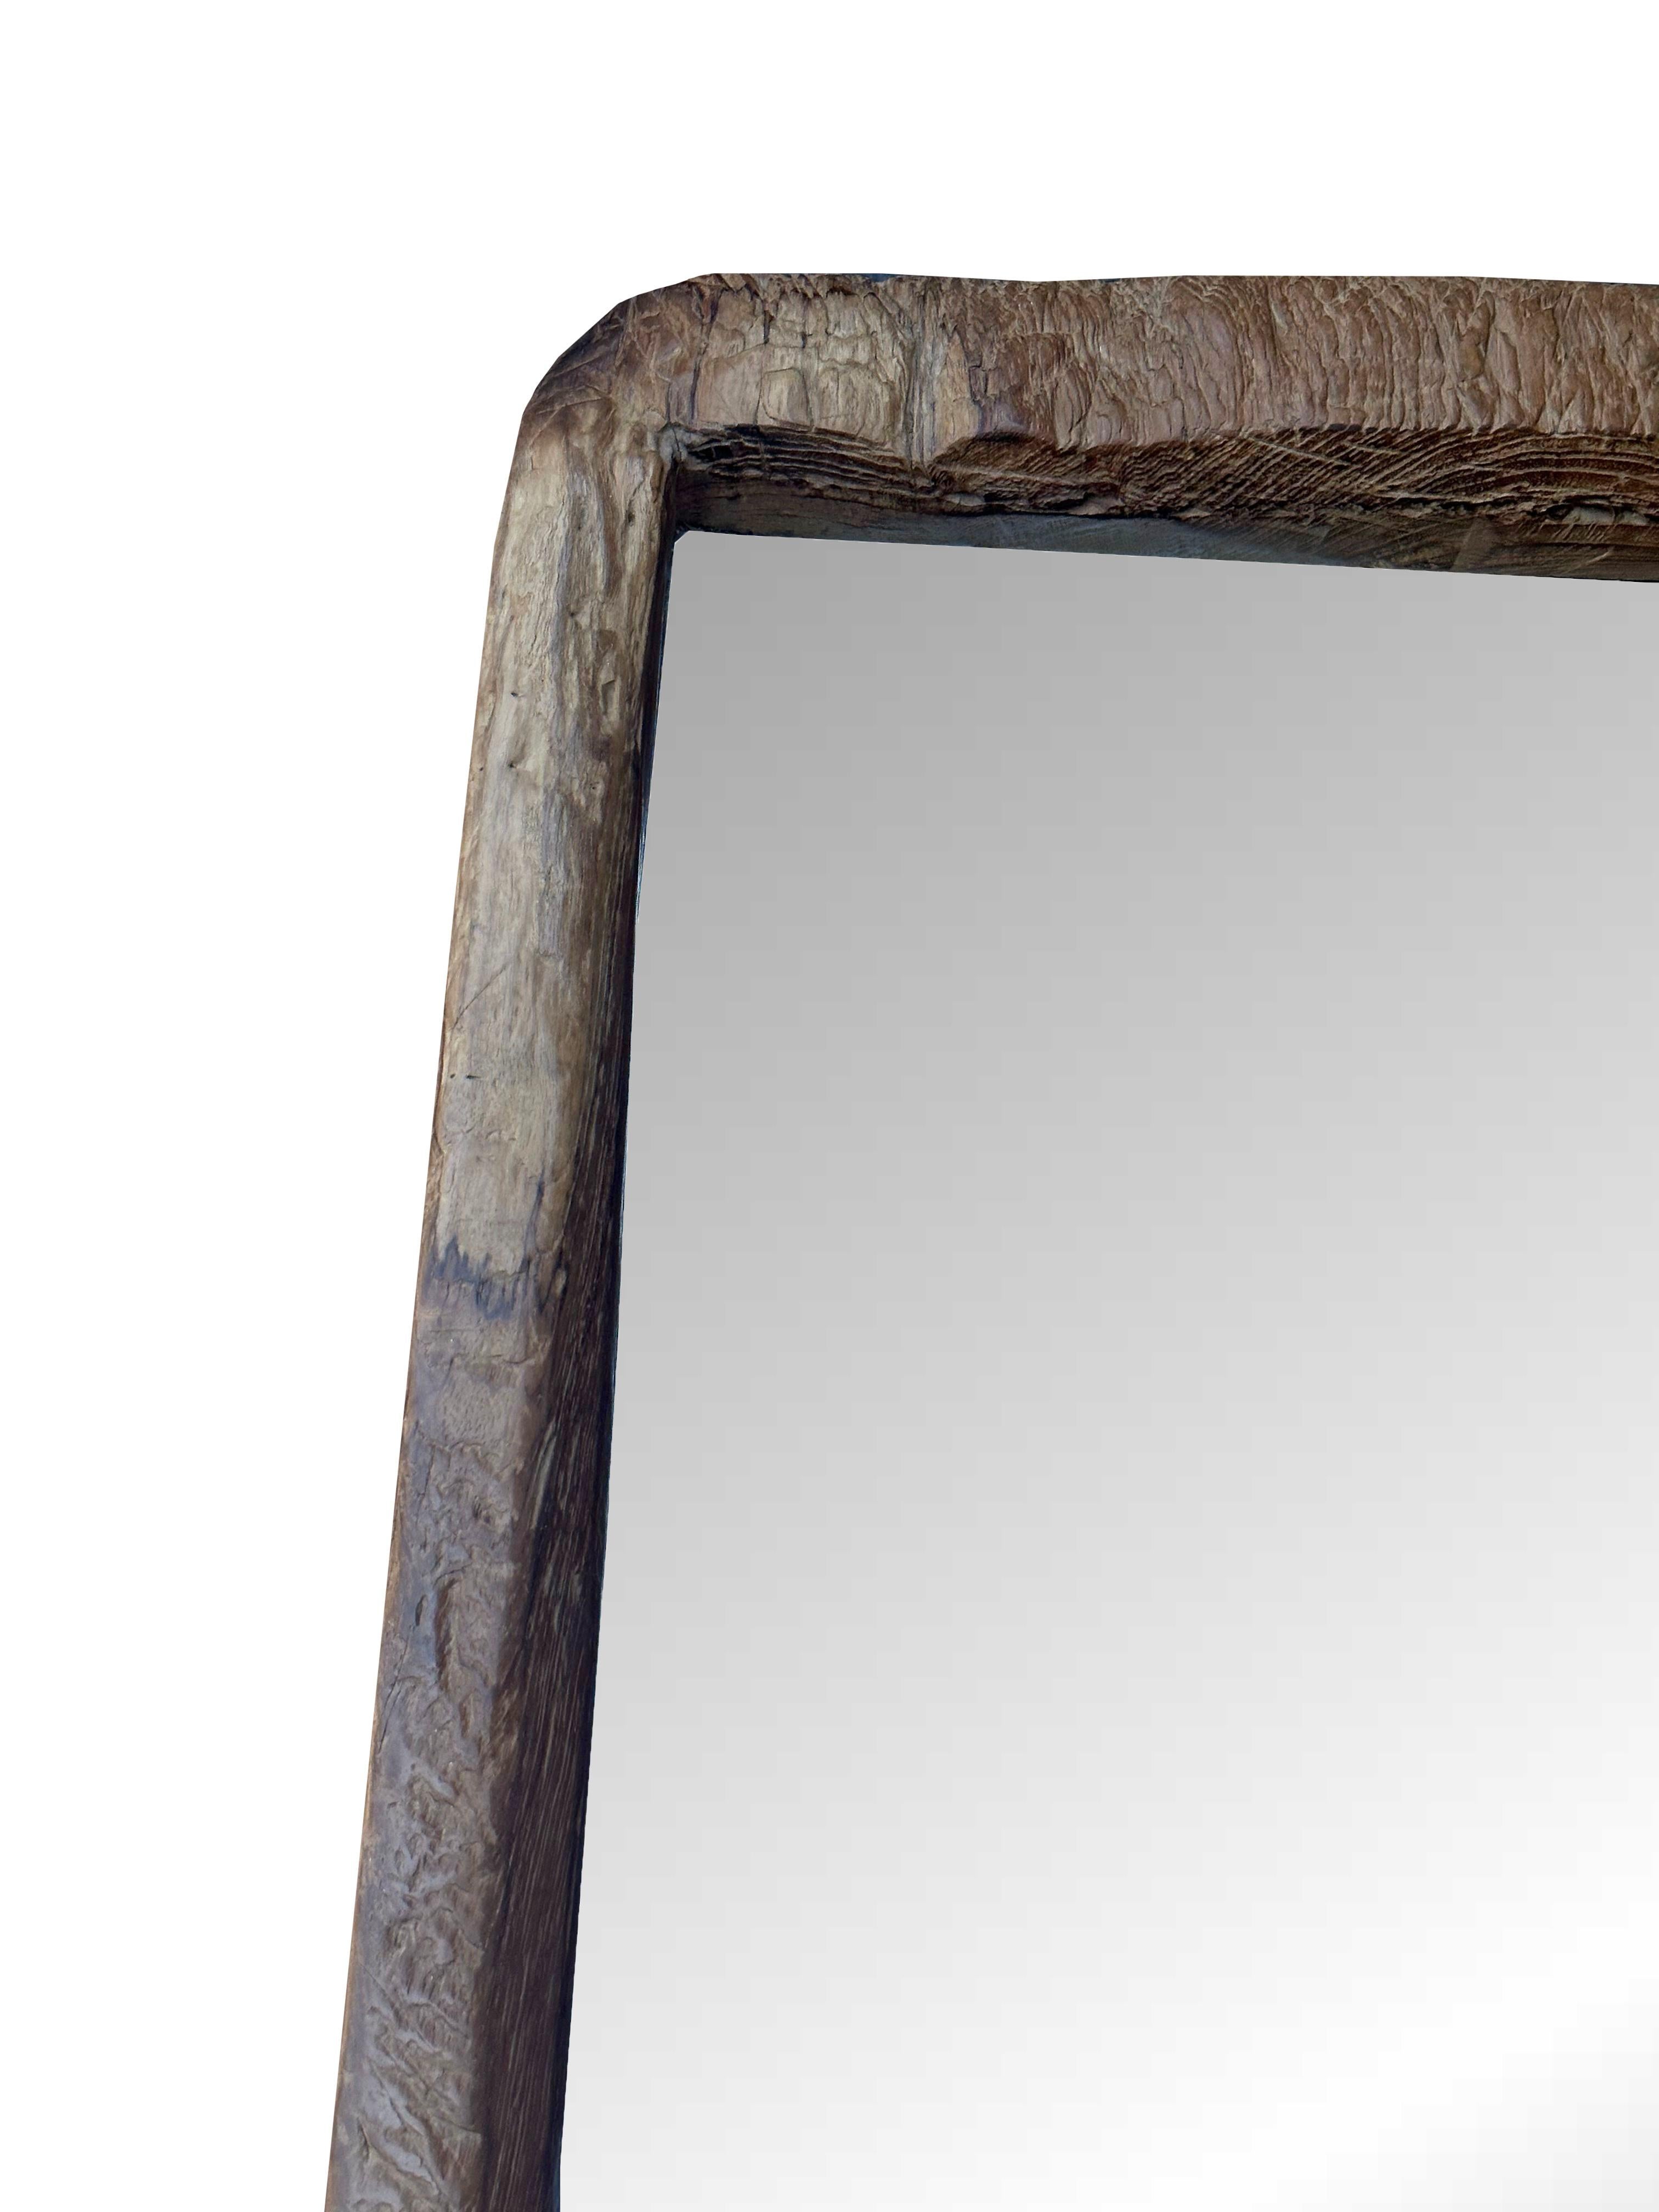 Hand-Crafted Rustic Teak Wood Mirror With Wonderful Age Related Patina & Markings